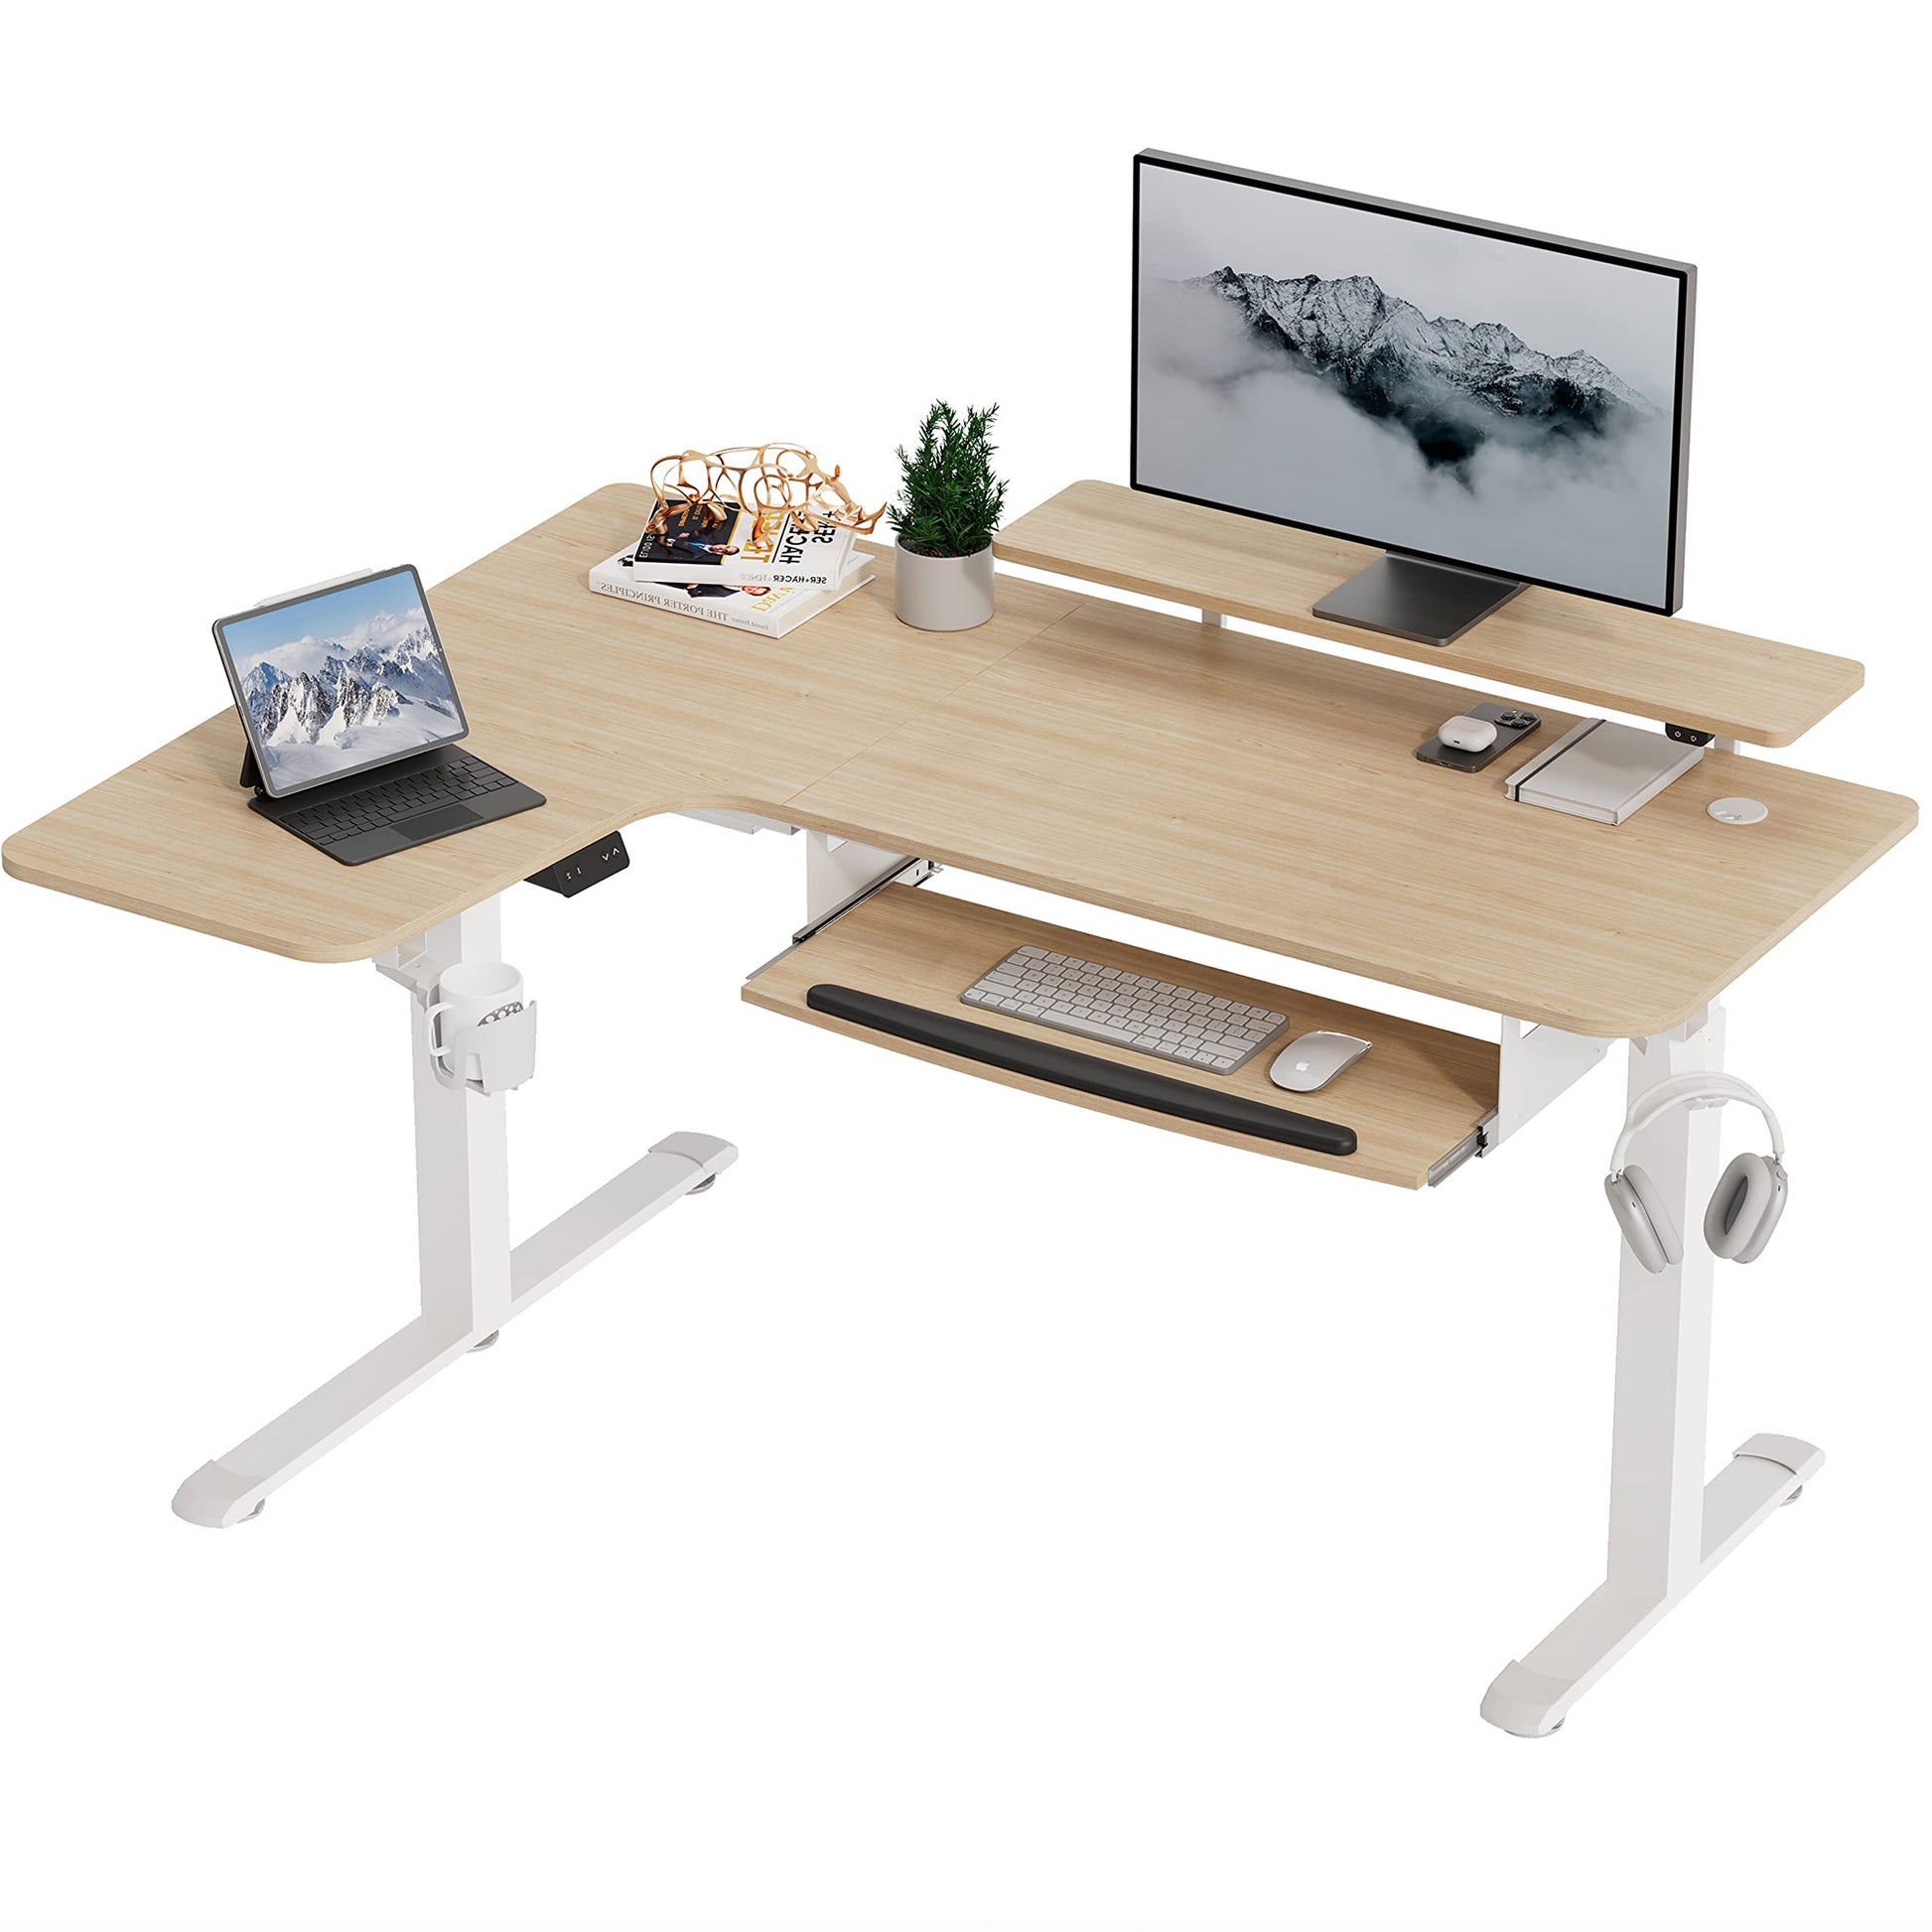 Eureka 60'' L shaped Standing Desk with Accessories set and Keyboard Tray, Oak-colored